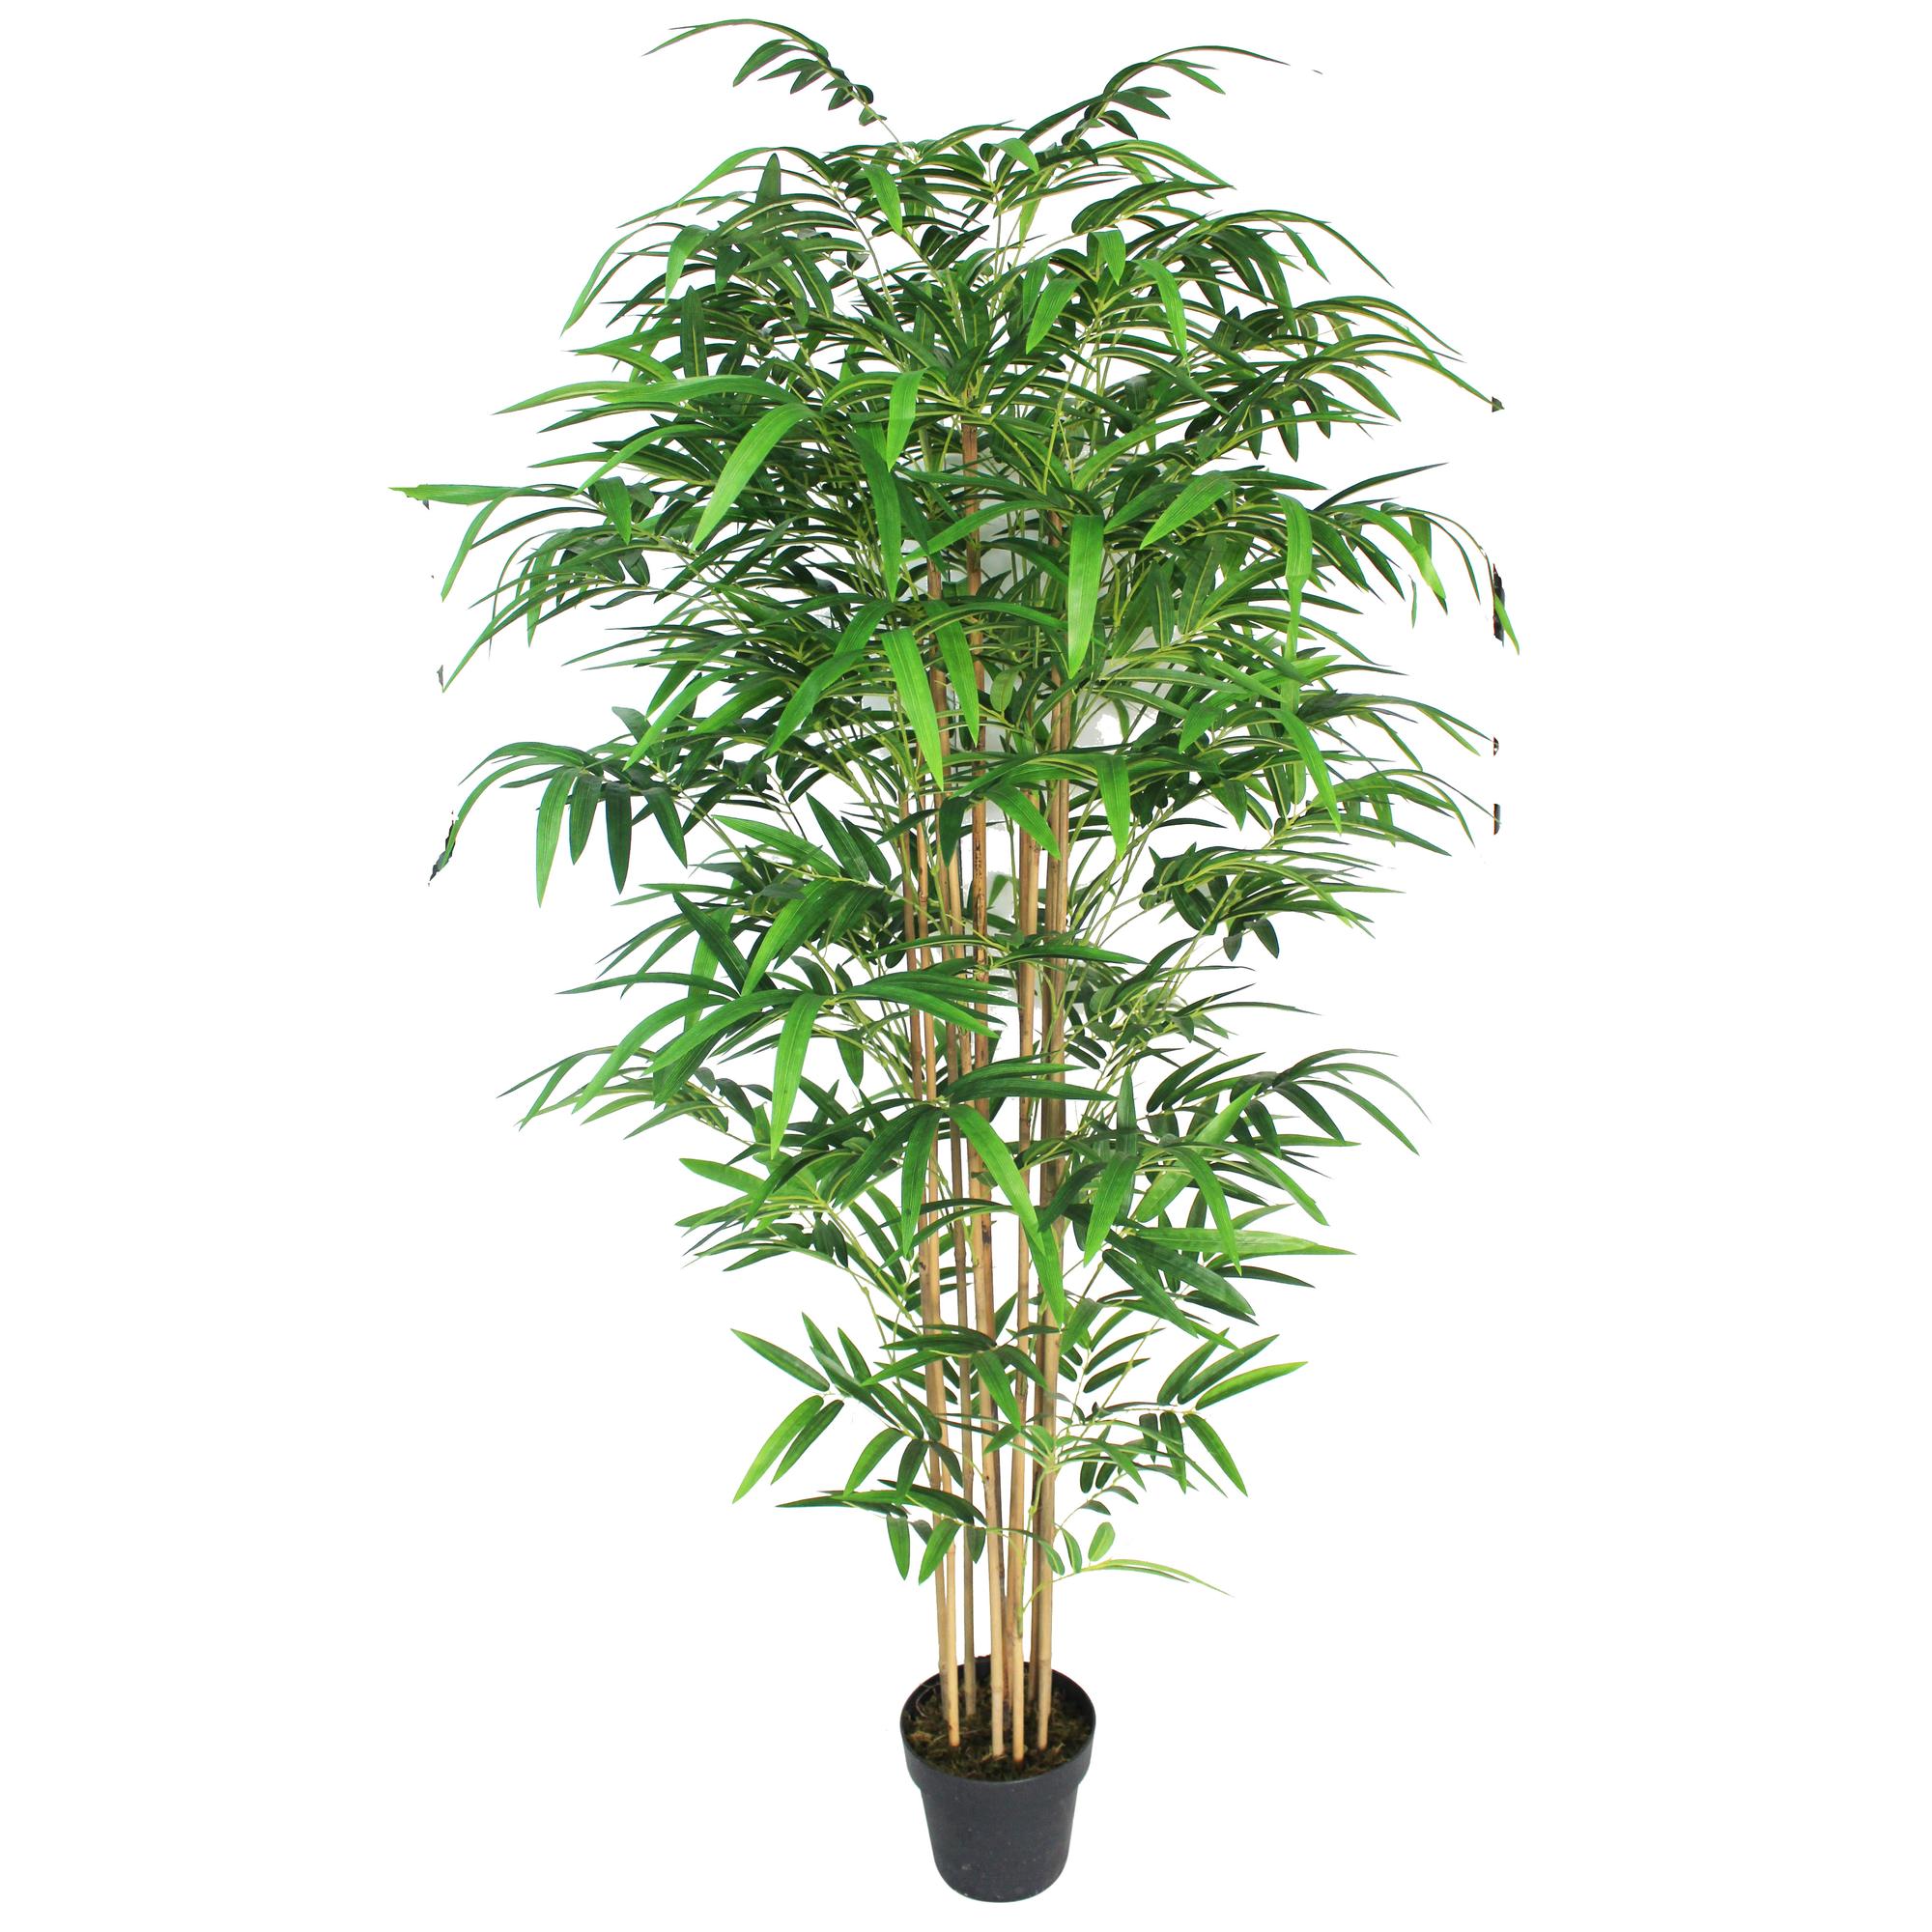 ARTIFICIAL PALNT 180CM BAMBOO - 592-311717